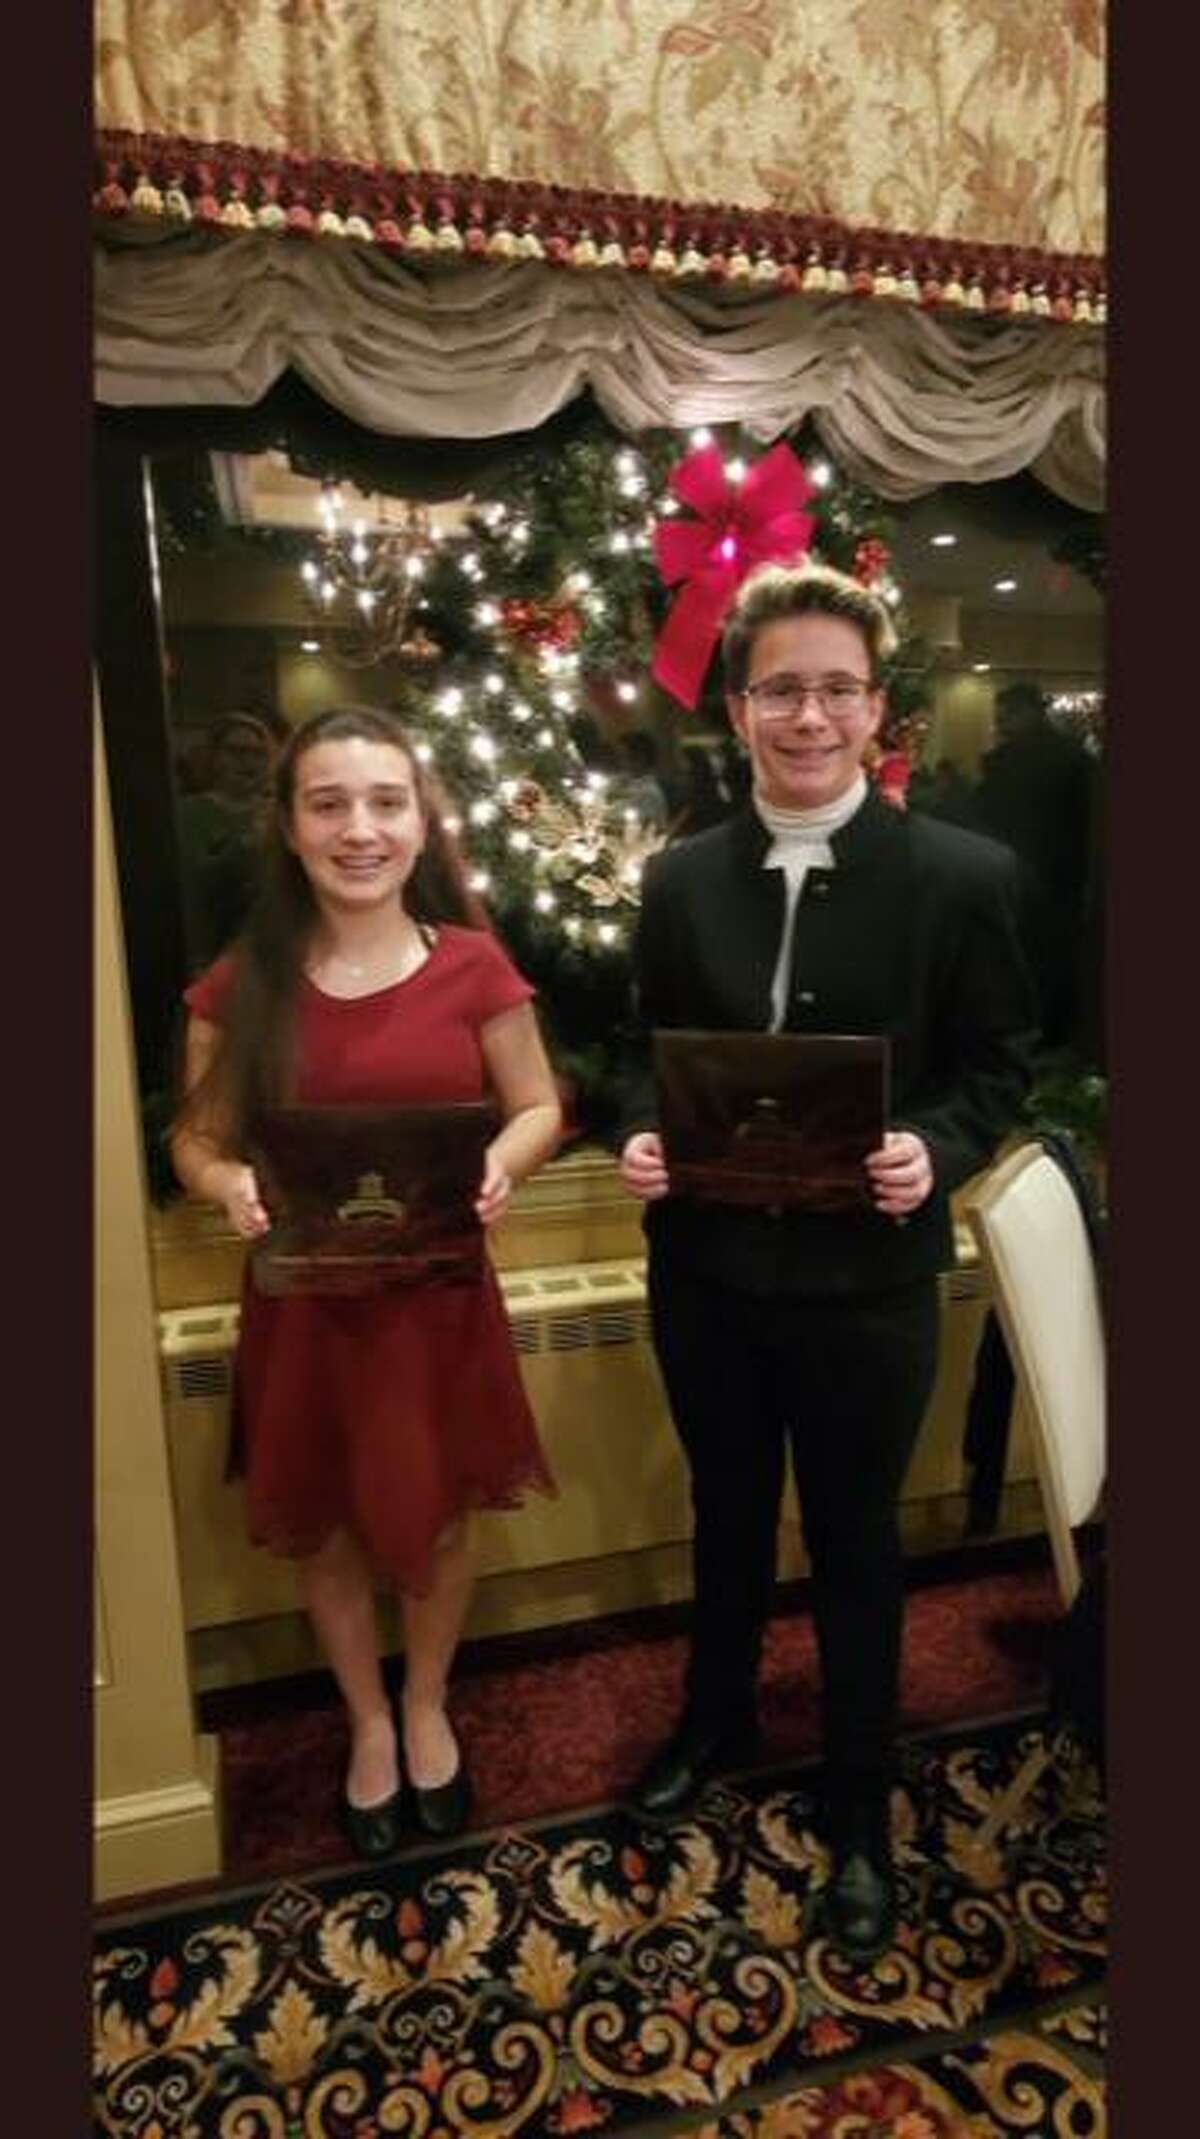 Shelton Intermediate School eighth graders Marissa Manzo and Robin Uhrynowski, who each earned Connecticut Association of Public School Superintendents (CAPSS) Superintendent/Student Recognition Awards earlier this month.